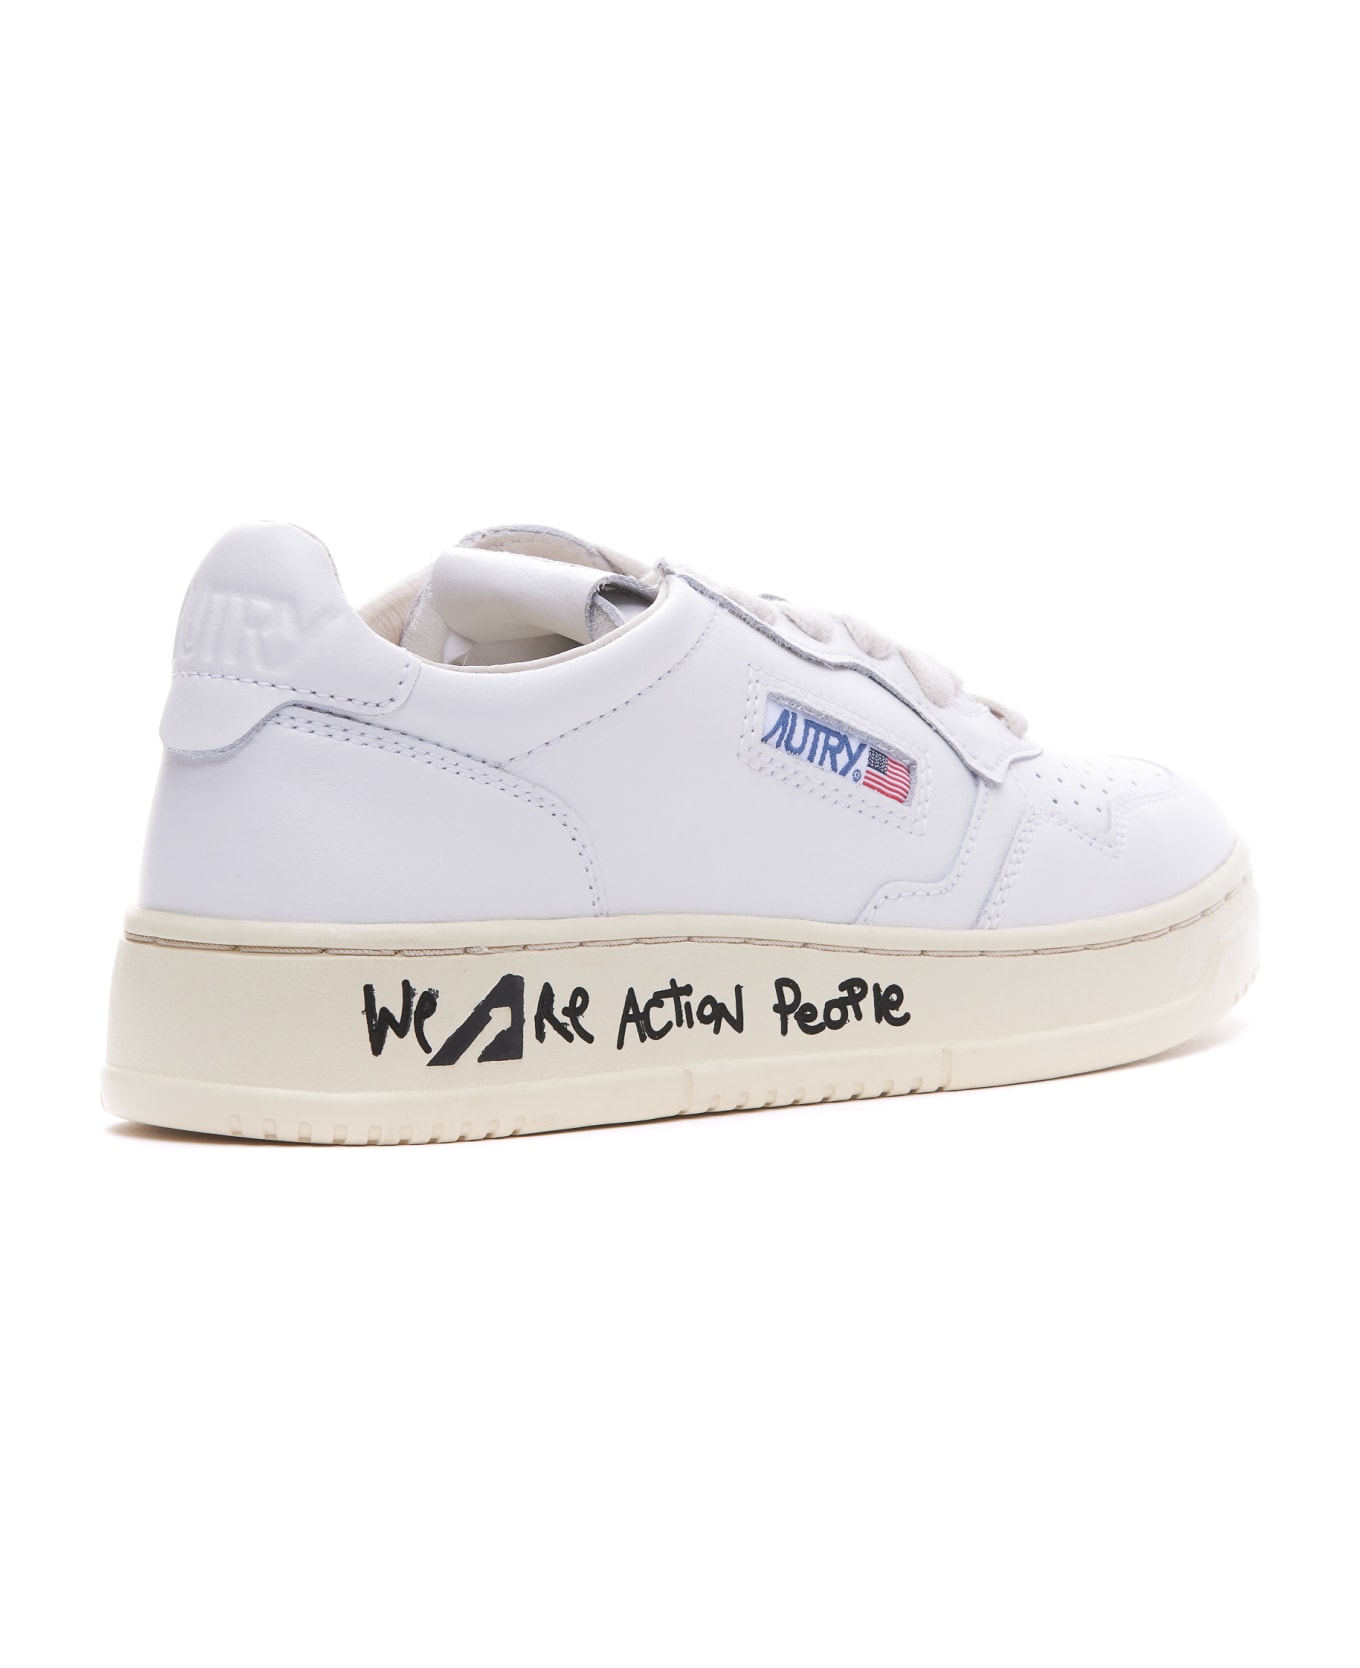 Autry White Aulw Ld06 Sneakers - Bianco スニーカー